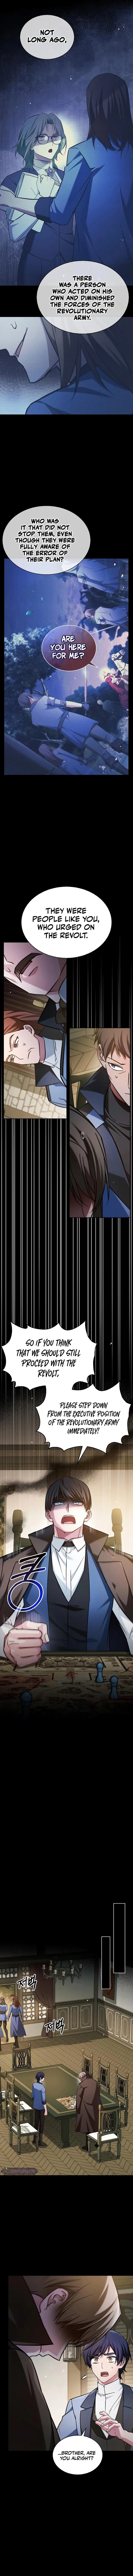 I’m Not That Kind of Talent Chapter 61 - Page 5